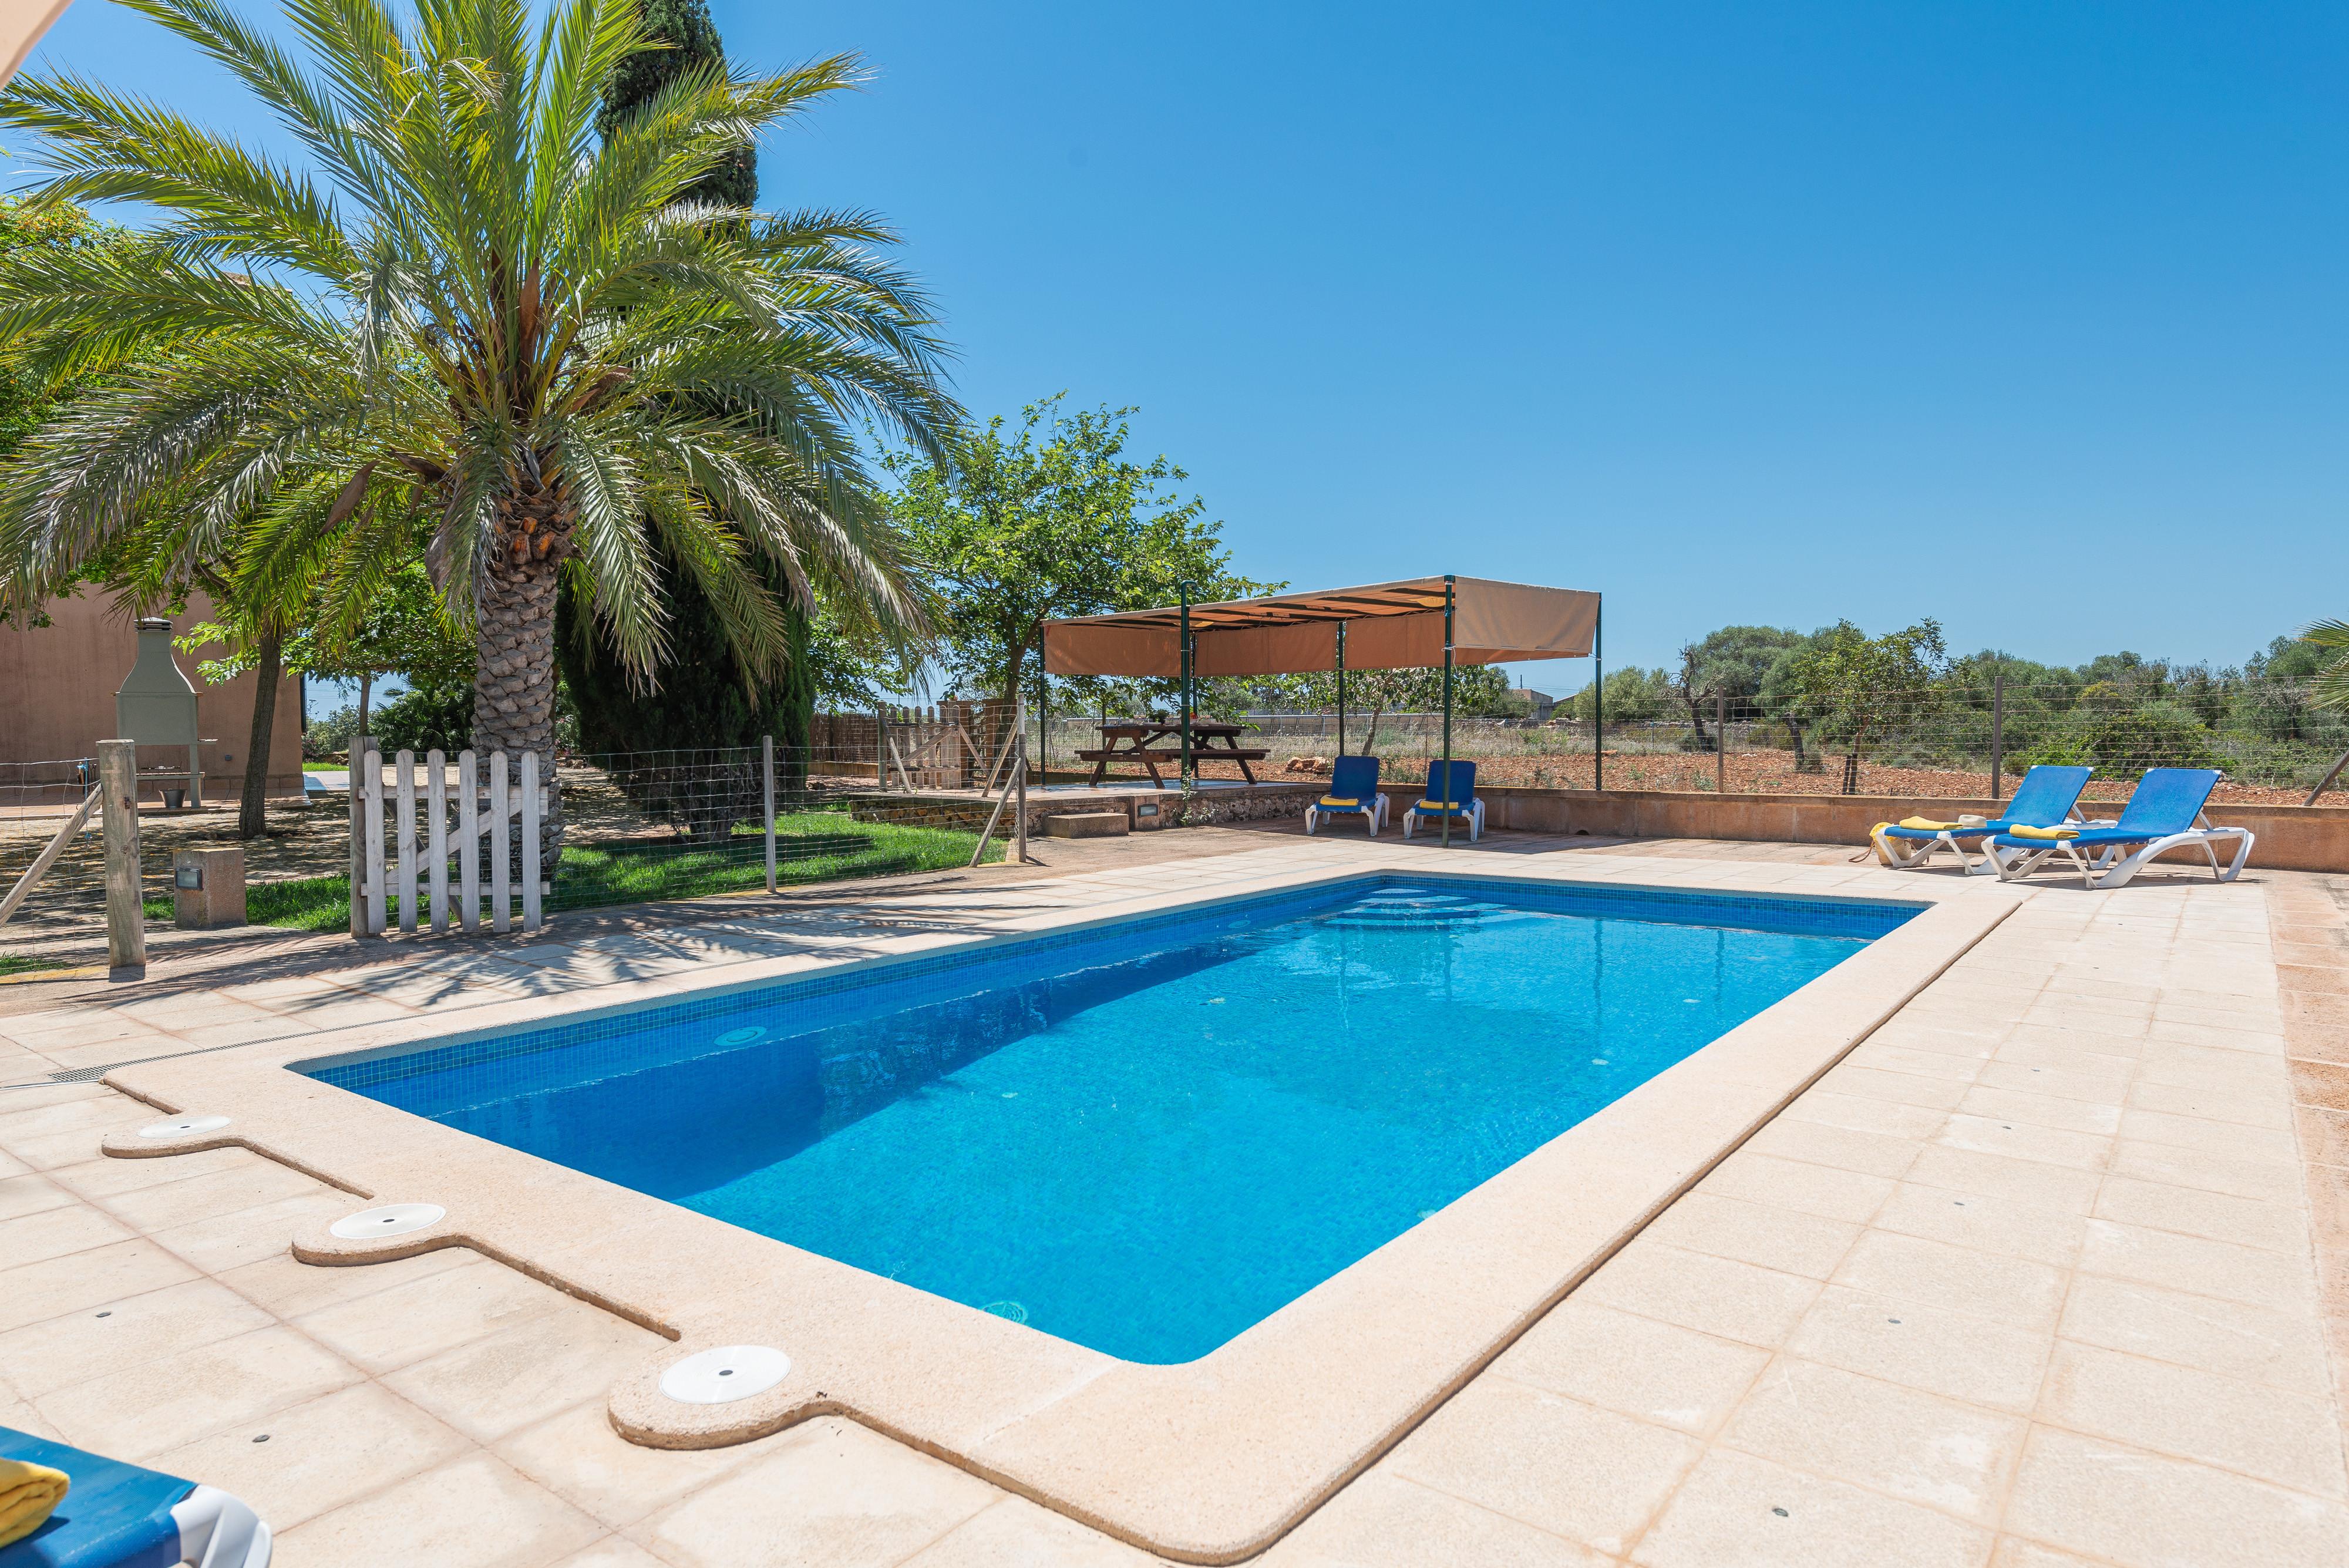 Property Image 1 - CAN PINTAT - Great country house with private pool very close to the beach. Free WIFI.